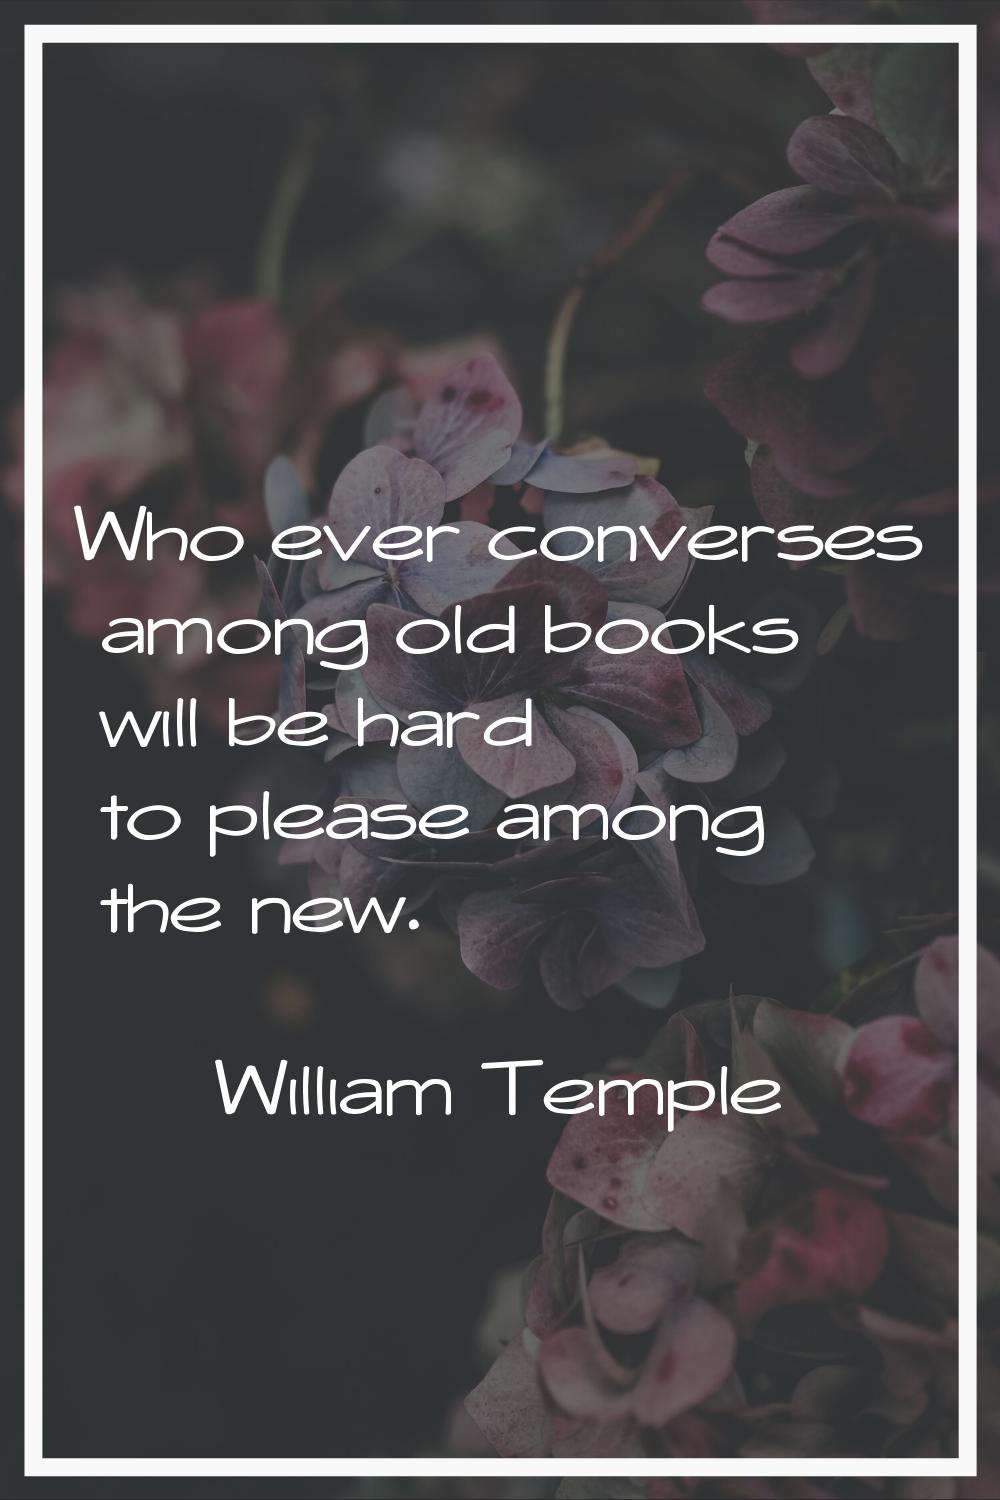 Who ever converses among old books will be hard to please among the new.